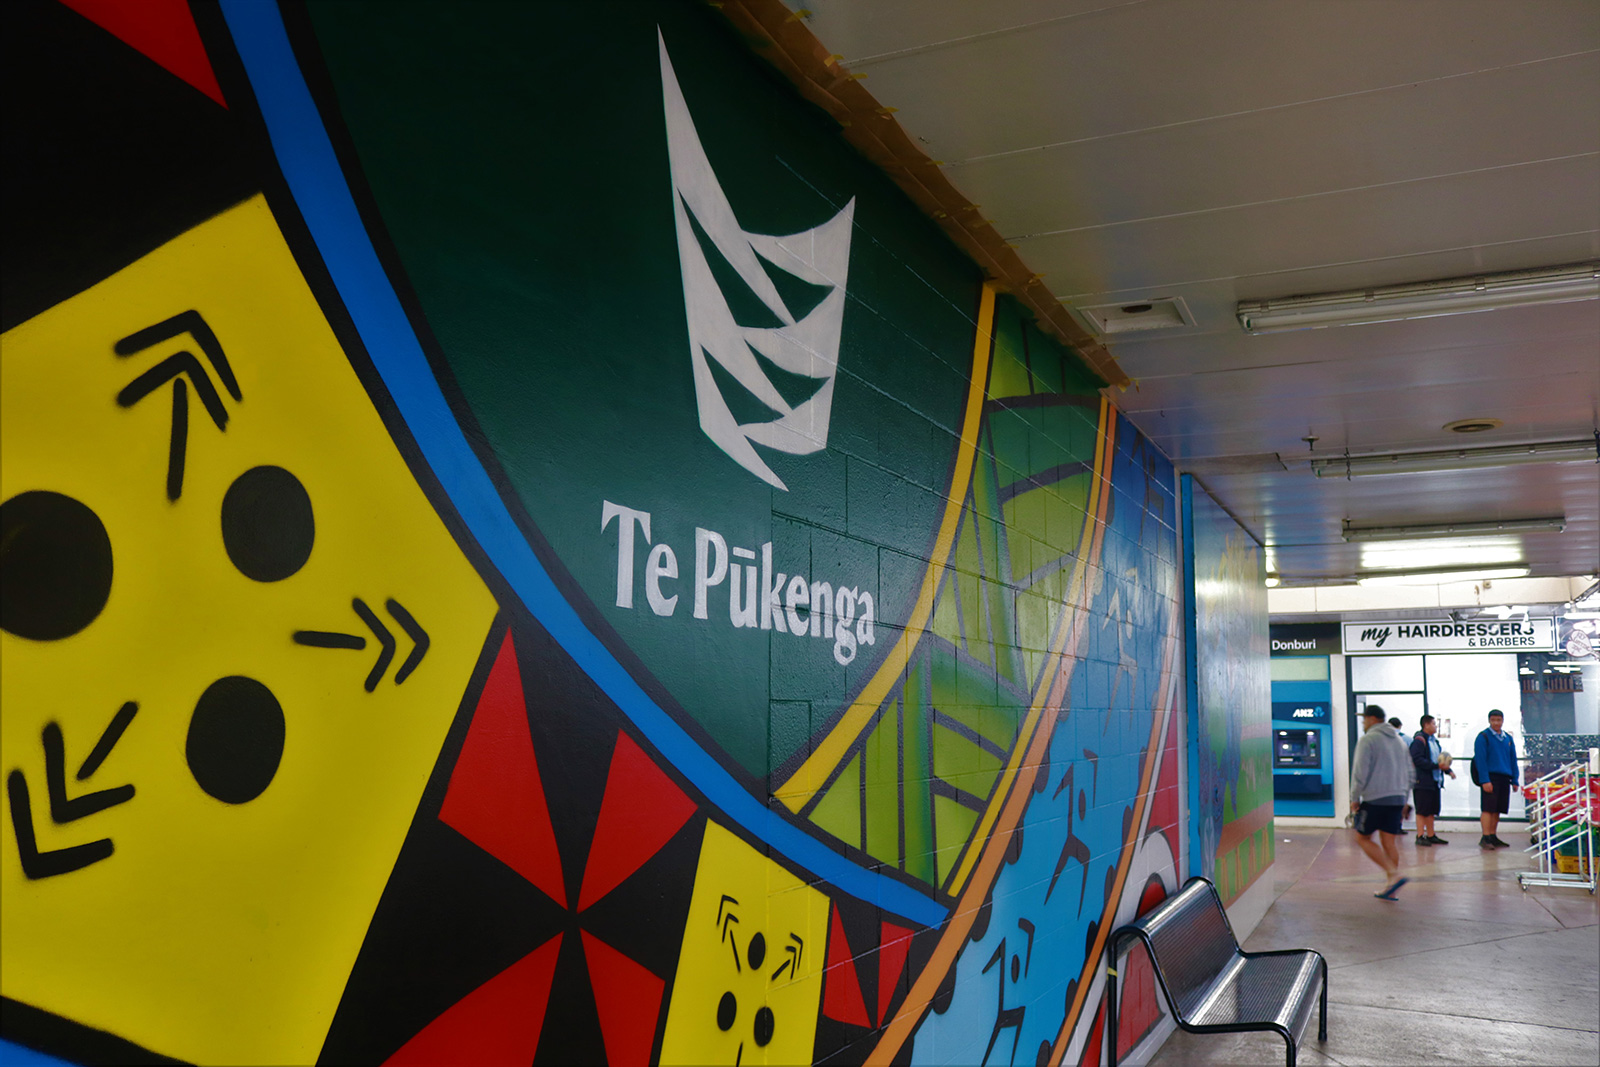 This image has been photographed from the left side of the mural. The mural contains multicultural patterns with Te Pūkenga logo at the top and centre of the mural. There is a metal seat up against the building that the mural is painted on and facing away. Looking to the right, in the background, there is an ANZ atm and a hairdressing shop.